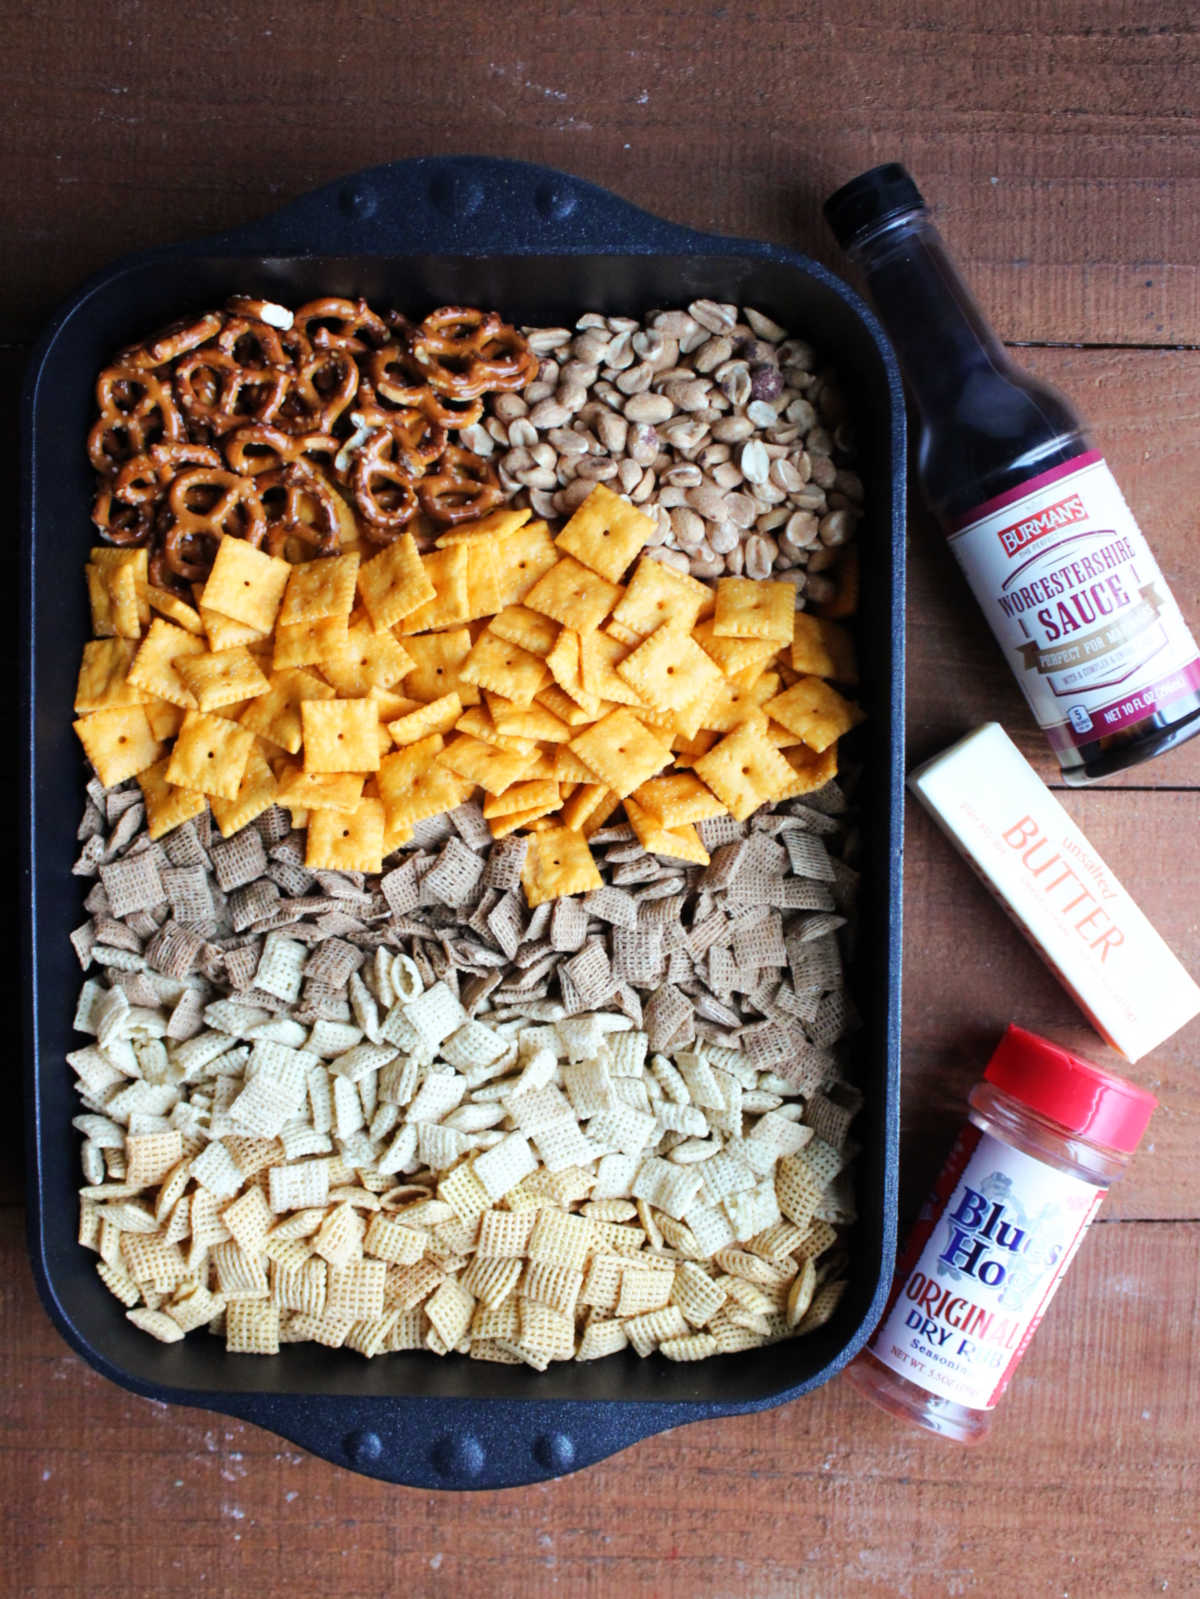 Roasting pan with 3 varieties of Chex cereal, cheese crackers, peanut, and pretzels inside next to Worcestershire sauce, butter, and Blues Hog bbq rub showing ingredients needed to make this snack mix.